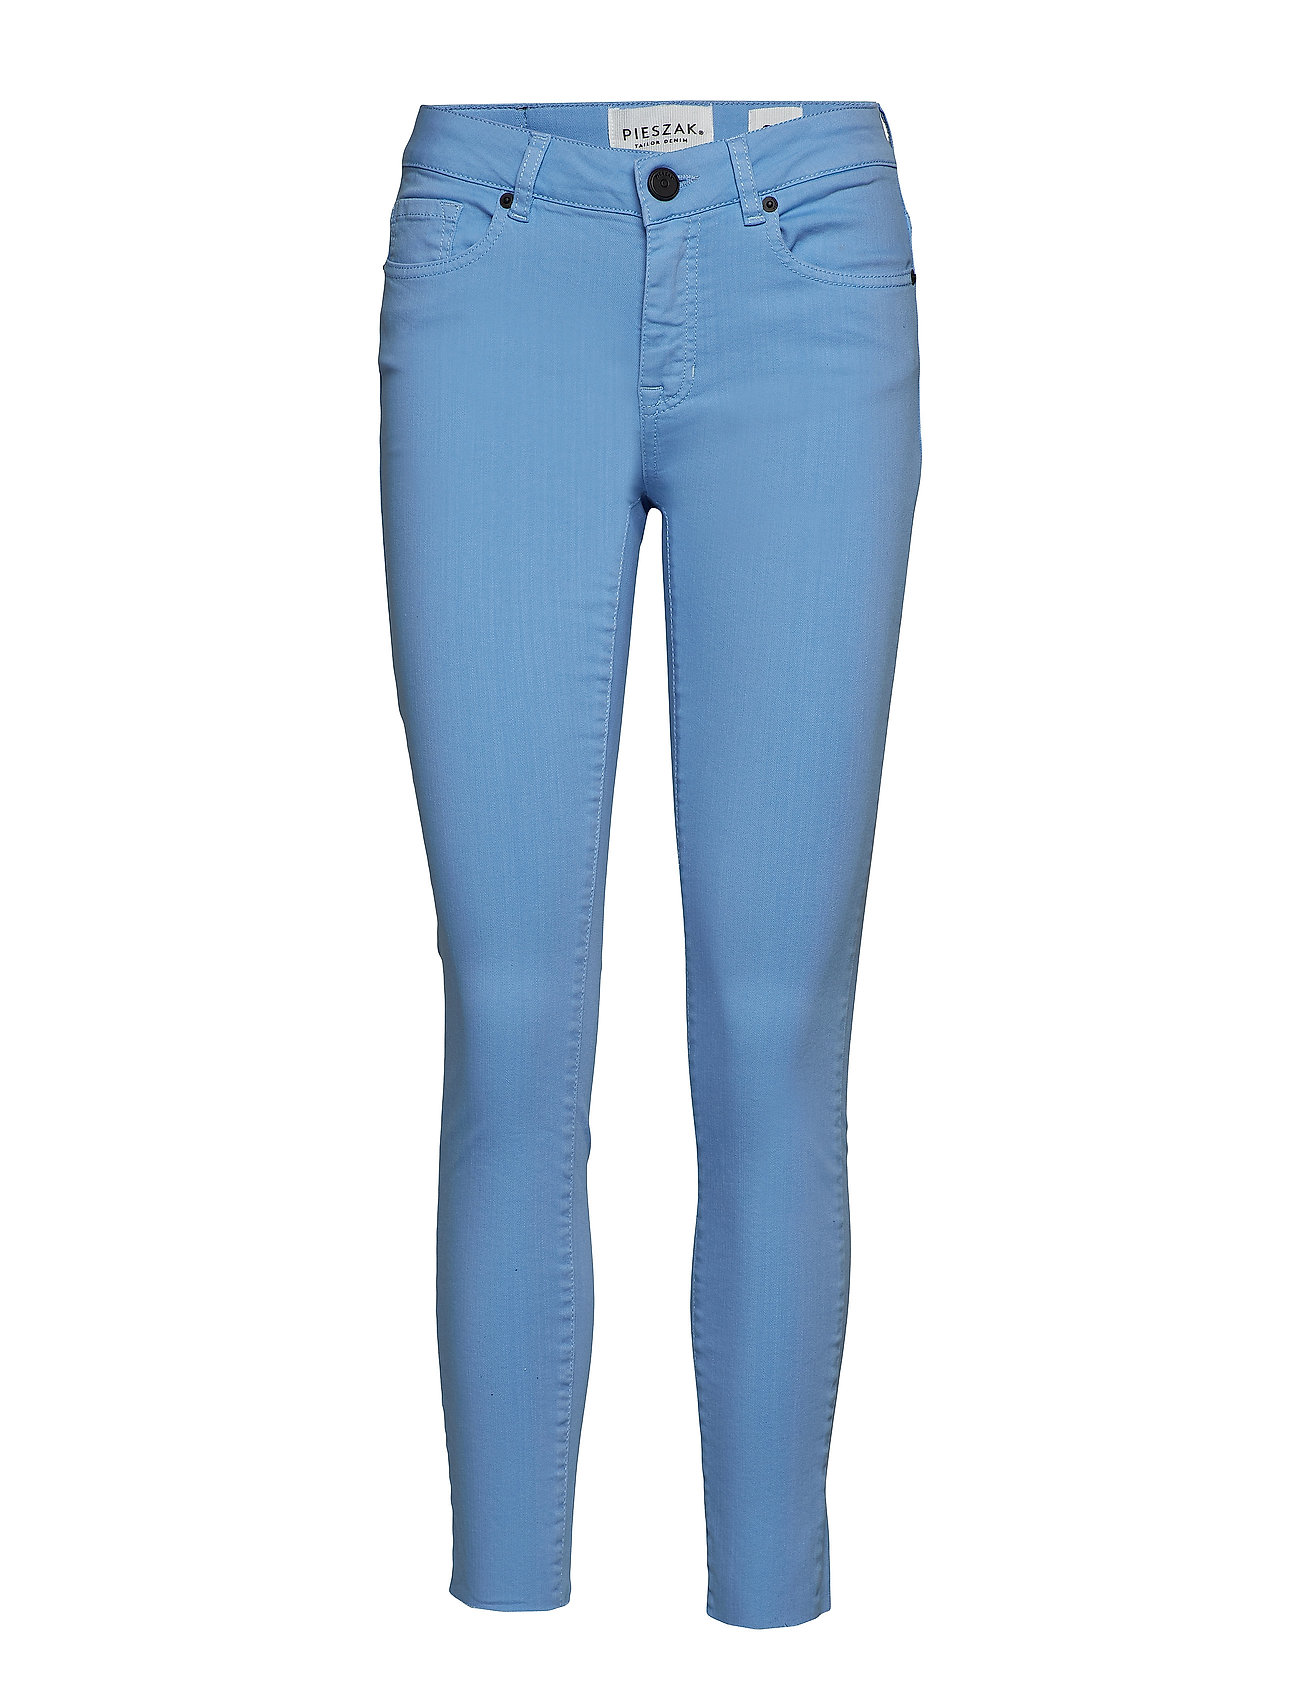 Pieszak Diva Cropped Colours Dusty Light Blue 46 Large Selection Of Outlet Styles Booztlet Com